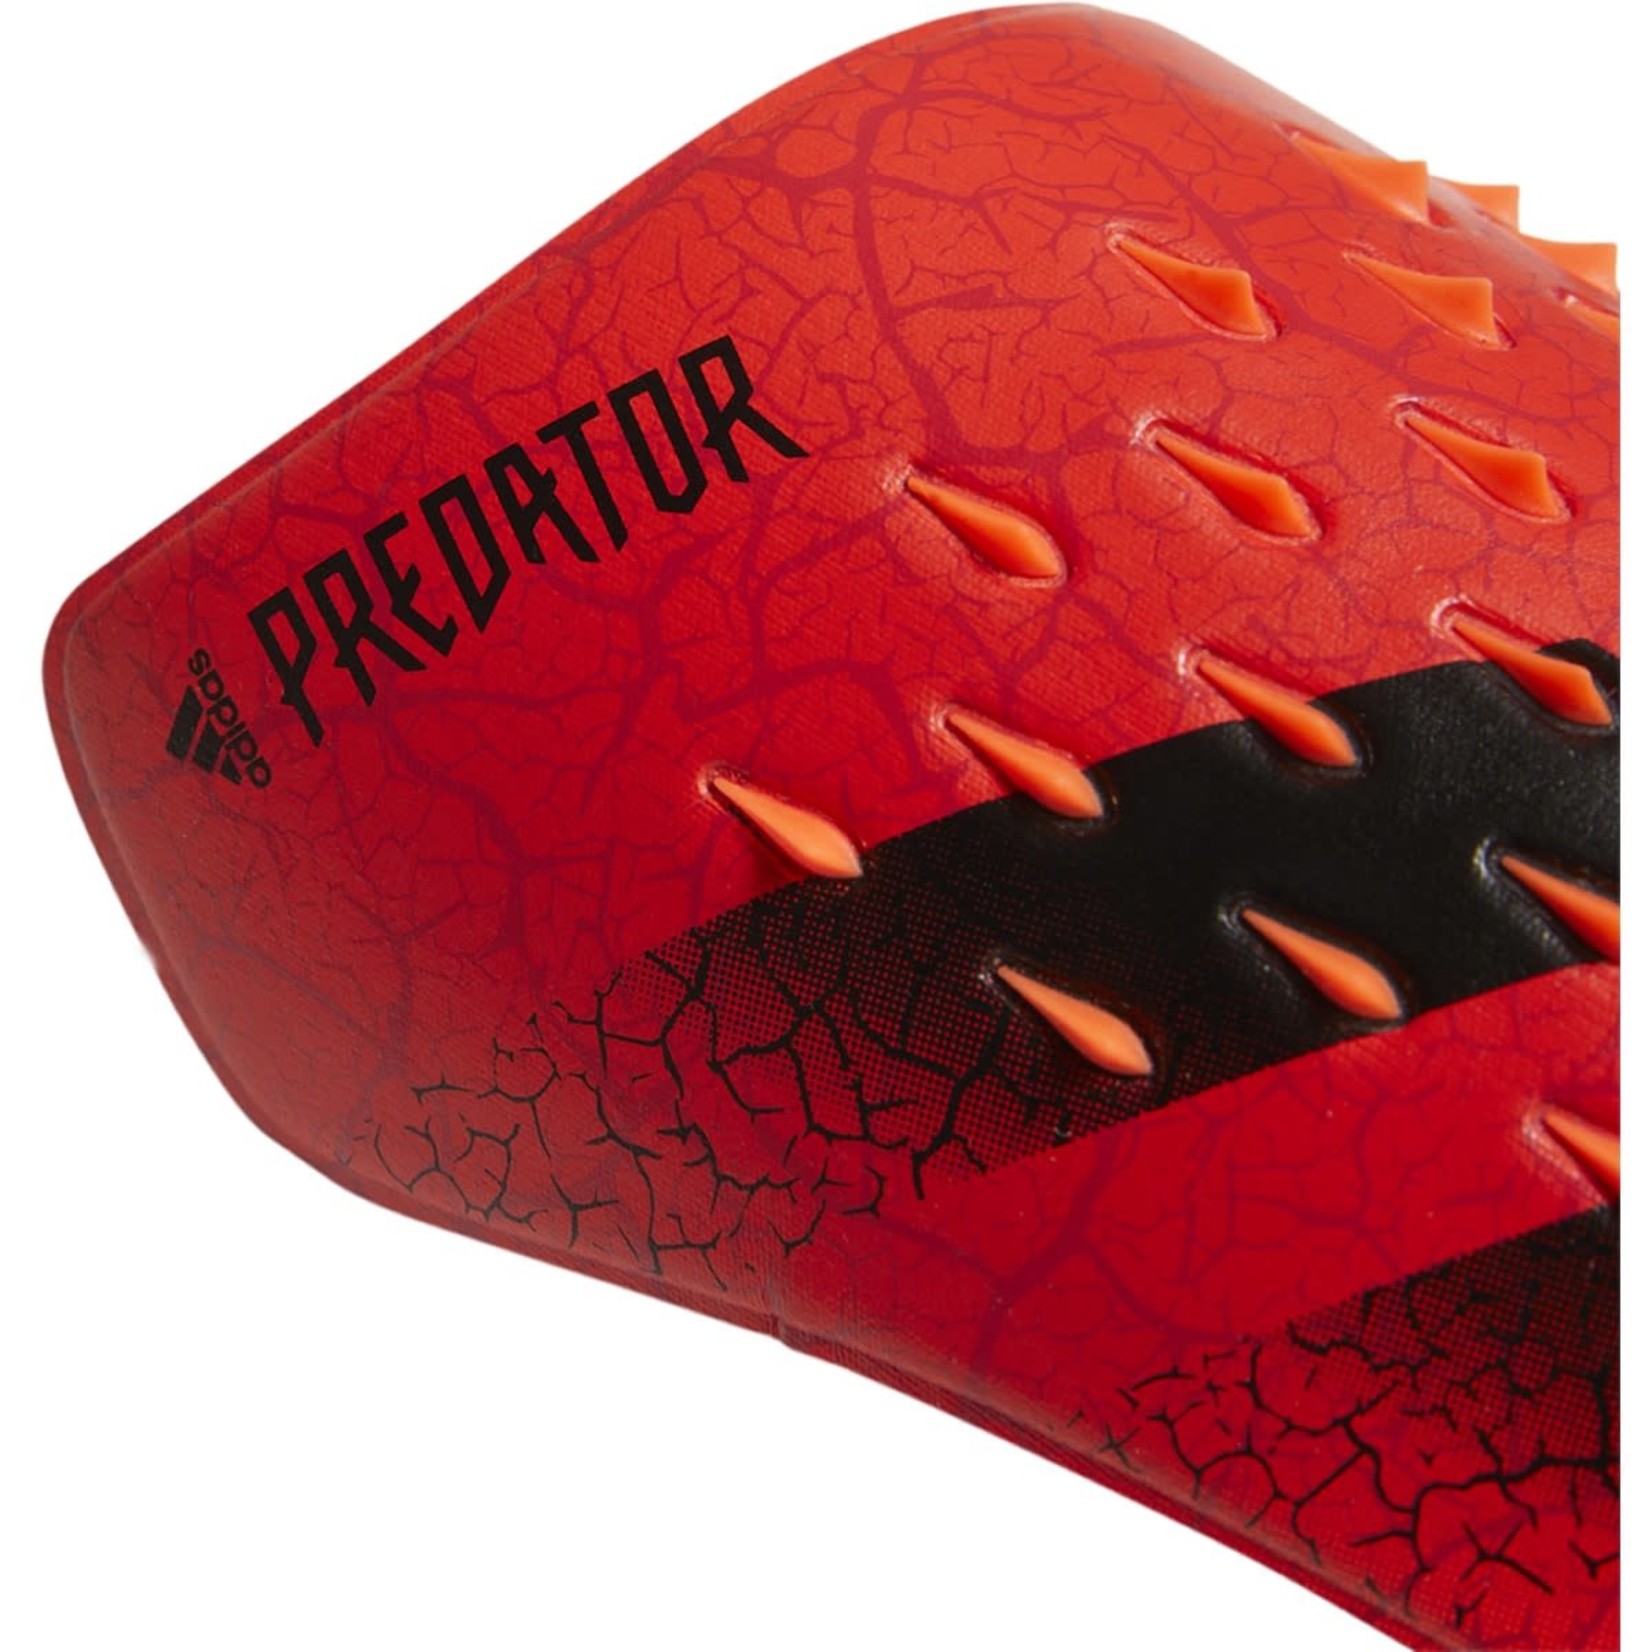 ADIDAS PREDATOR COMPETITION GUARD (RED)